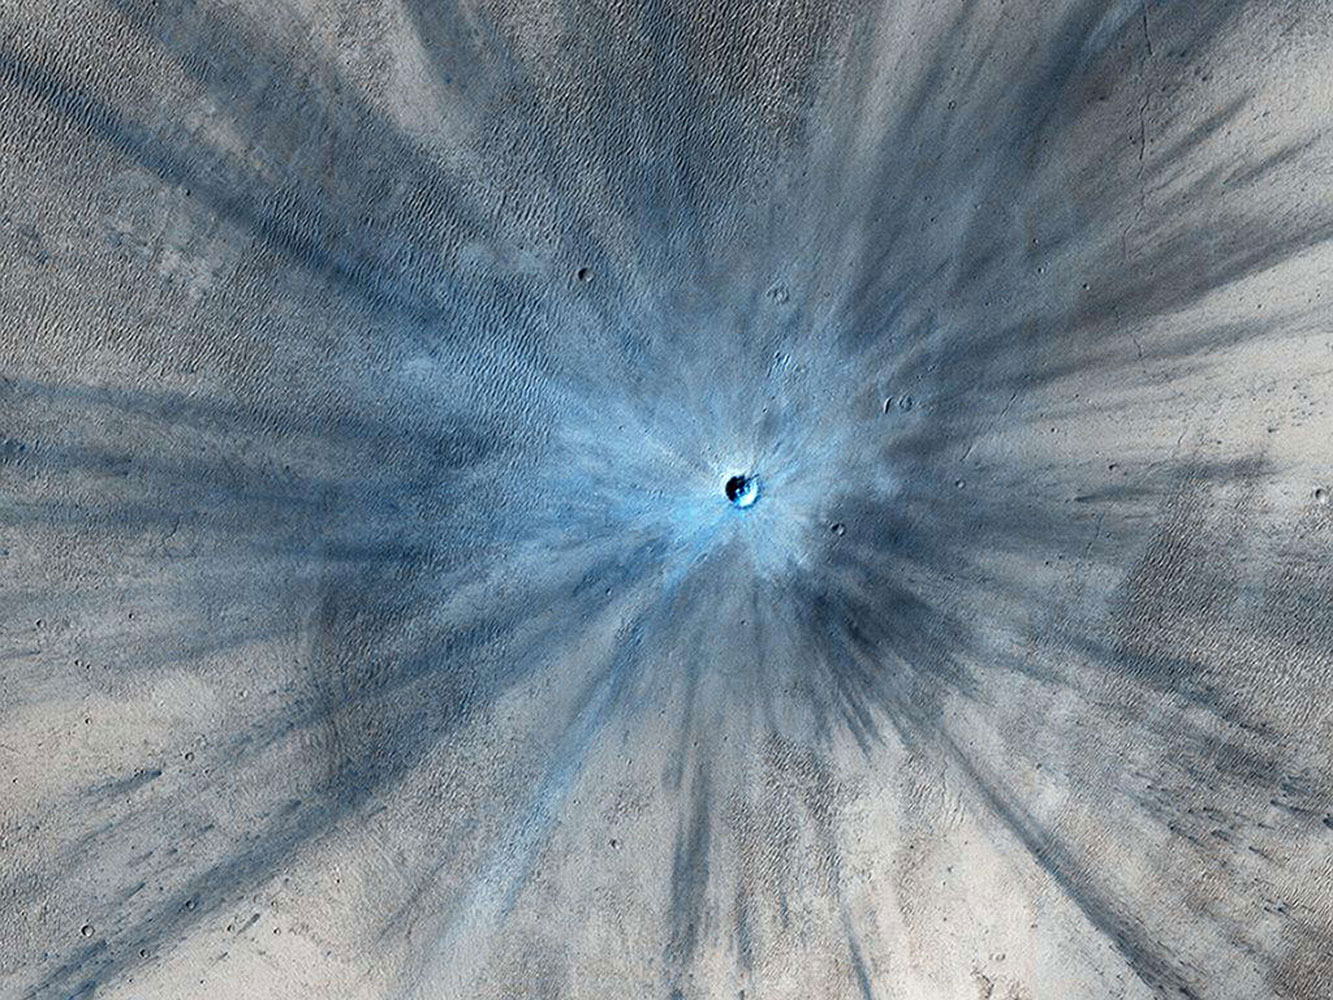 A fresh impact crater, captured by NASA's Mars Reconnaissance Orbiter on Nov. 19, 2013 and released on Feb. 5, 2014. The crater spans approximately 100 feet (30 meters) in diameter and is surrounded by a large, rayed blast zone.